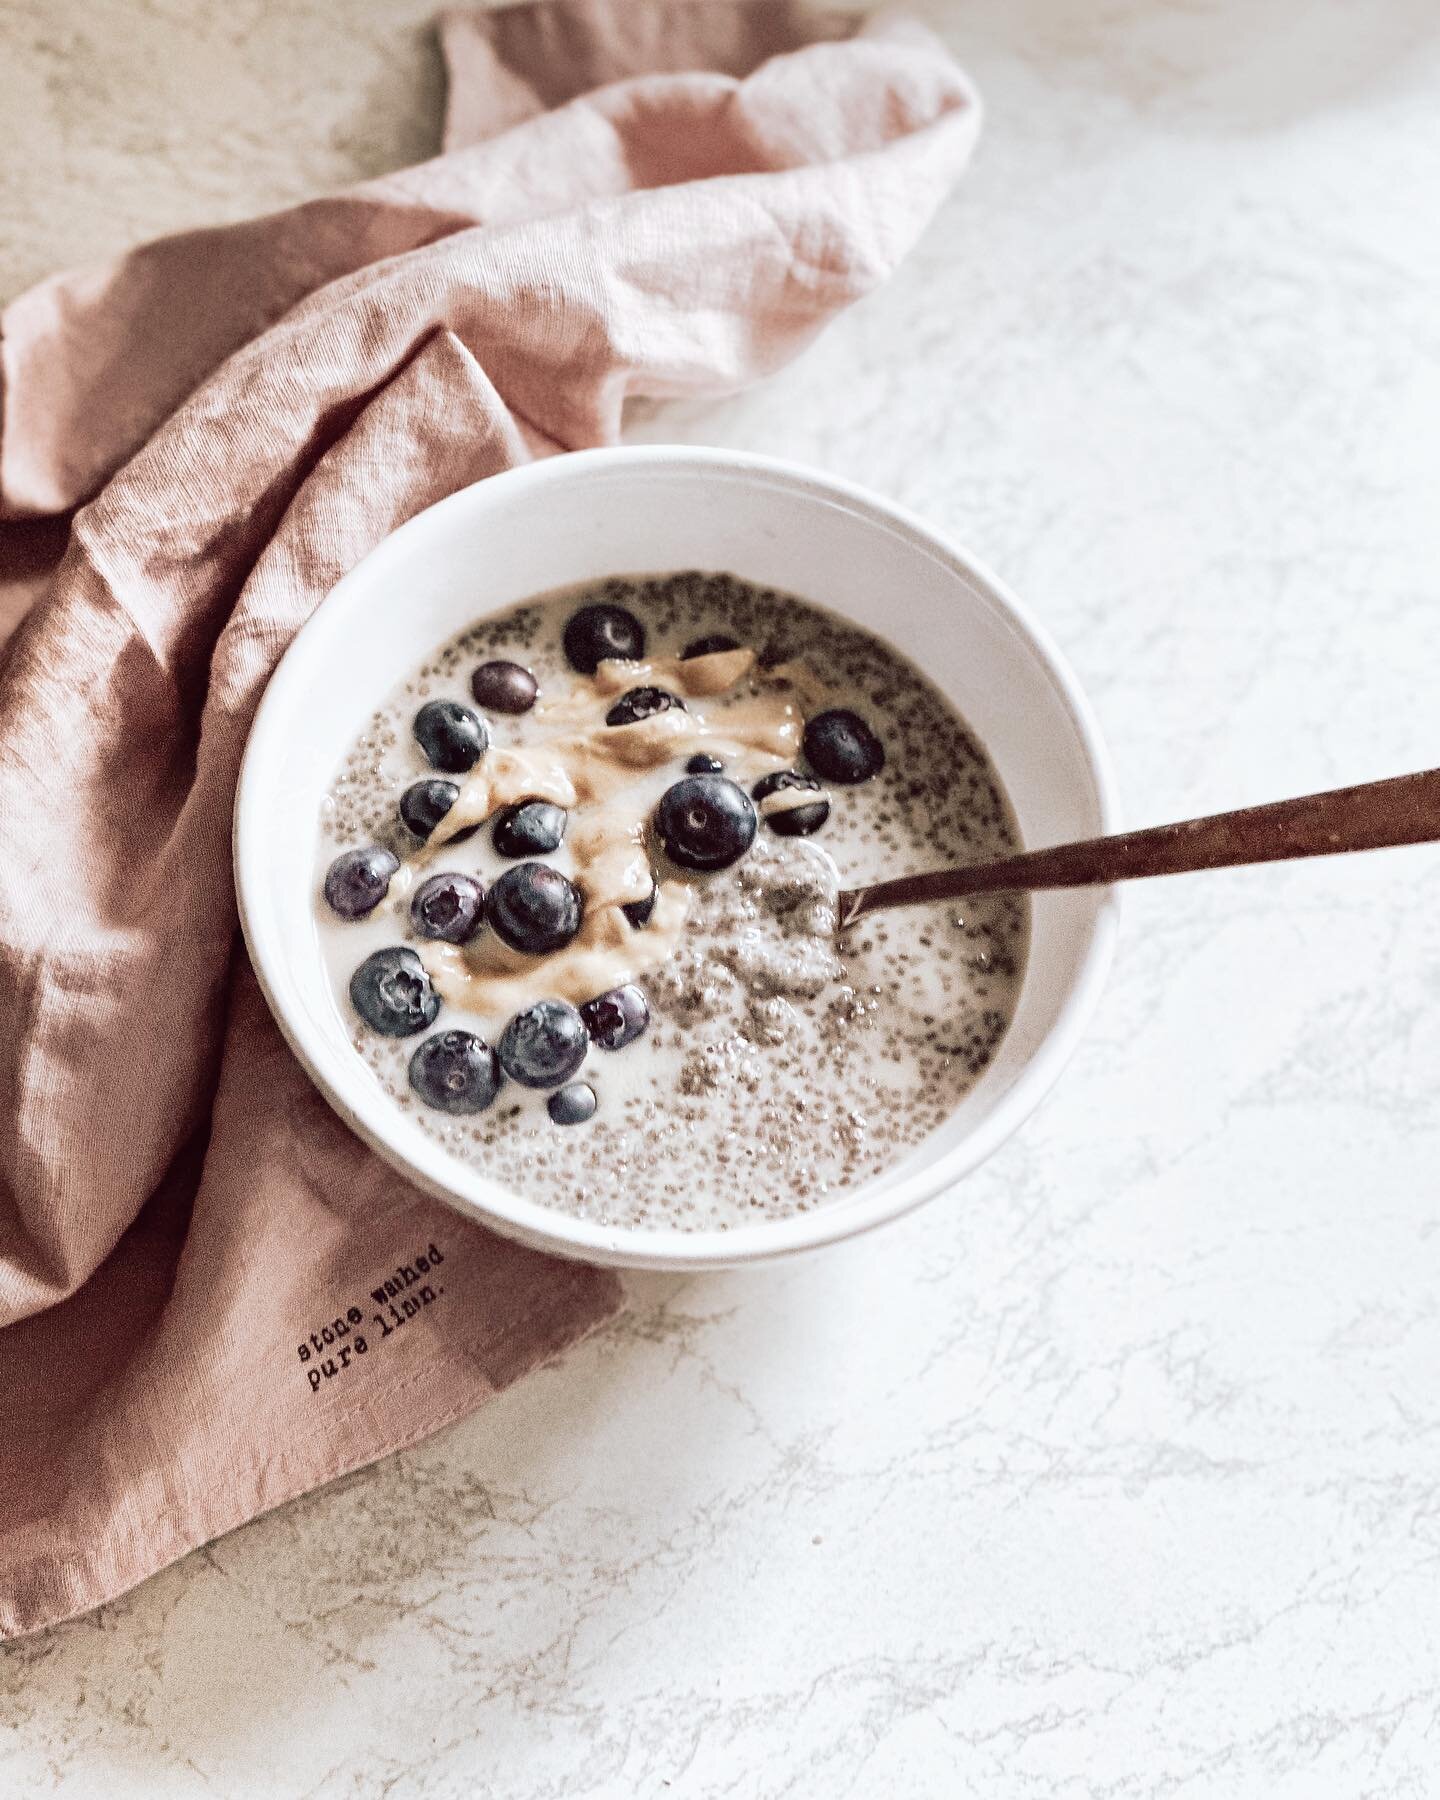 Warm blueberry cinnamon chia pudding for a rainy, moody day, but at least it&rsquo;s almost the weekend. 🤍🌿